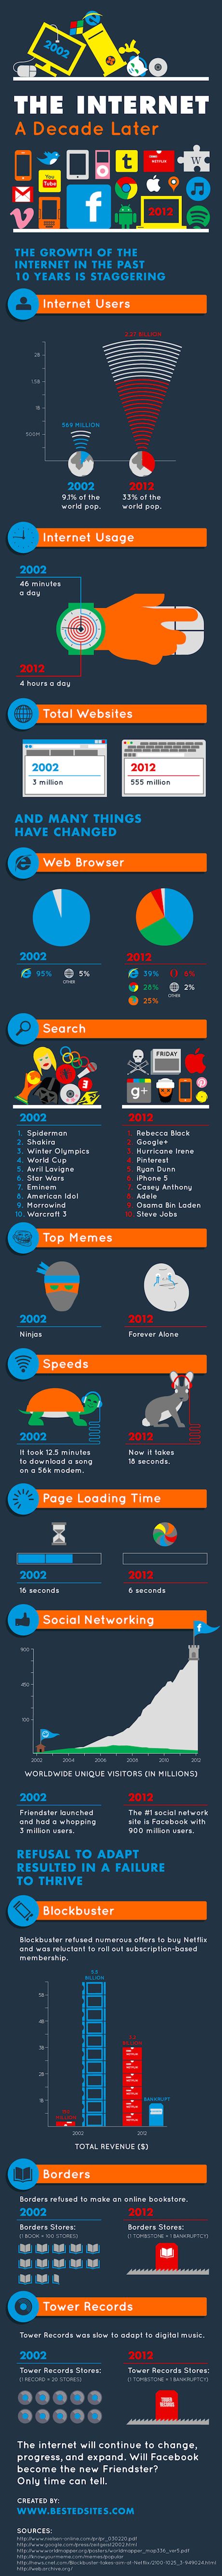 10 Years if the Internet